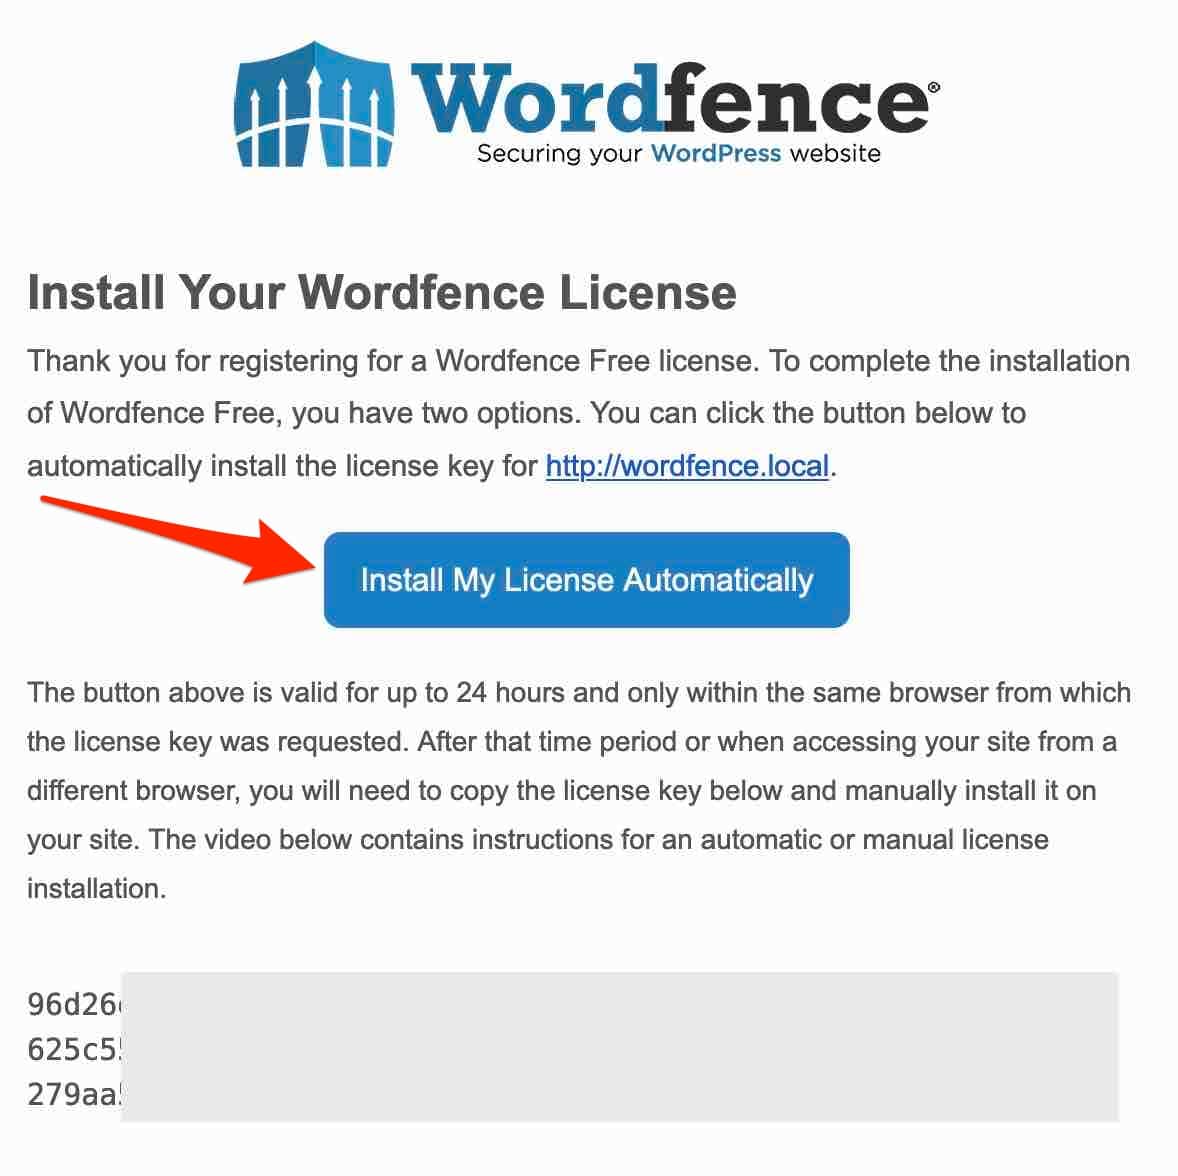 Wordfence can install your license automatically.